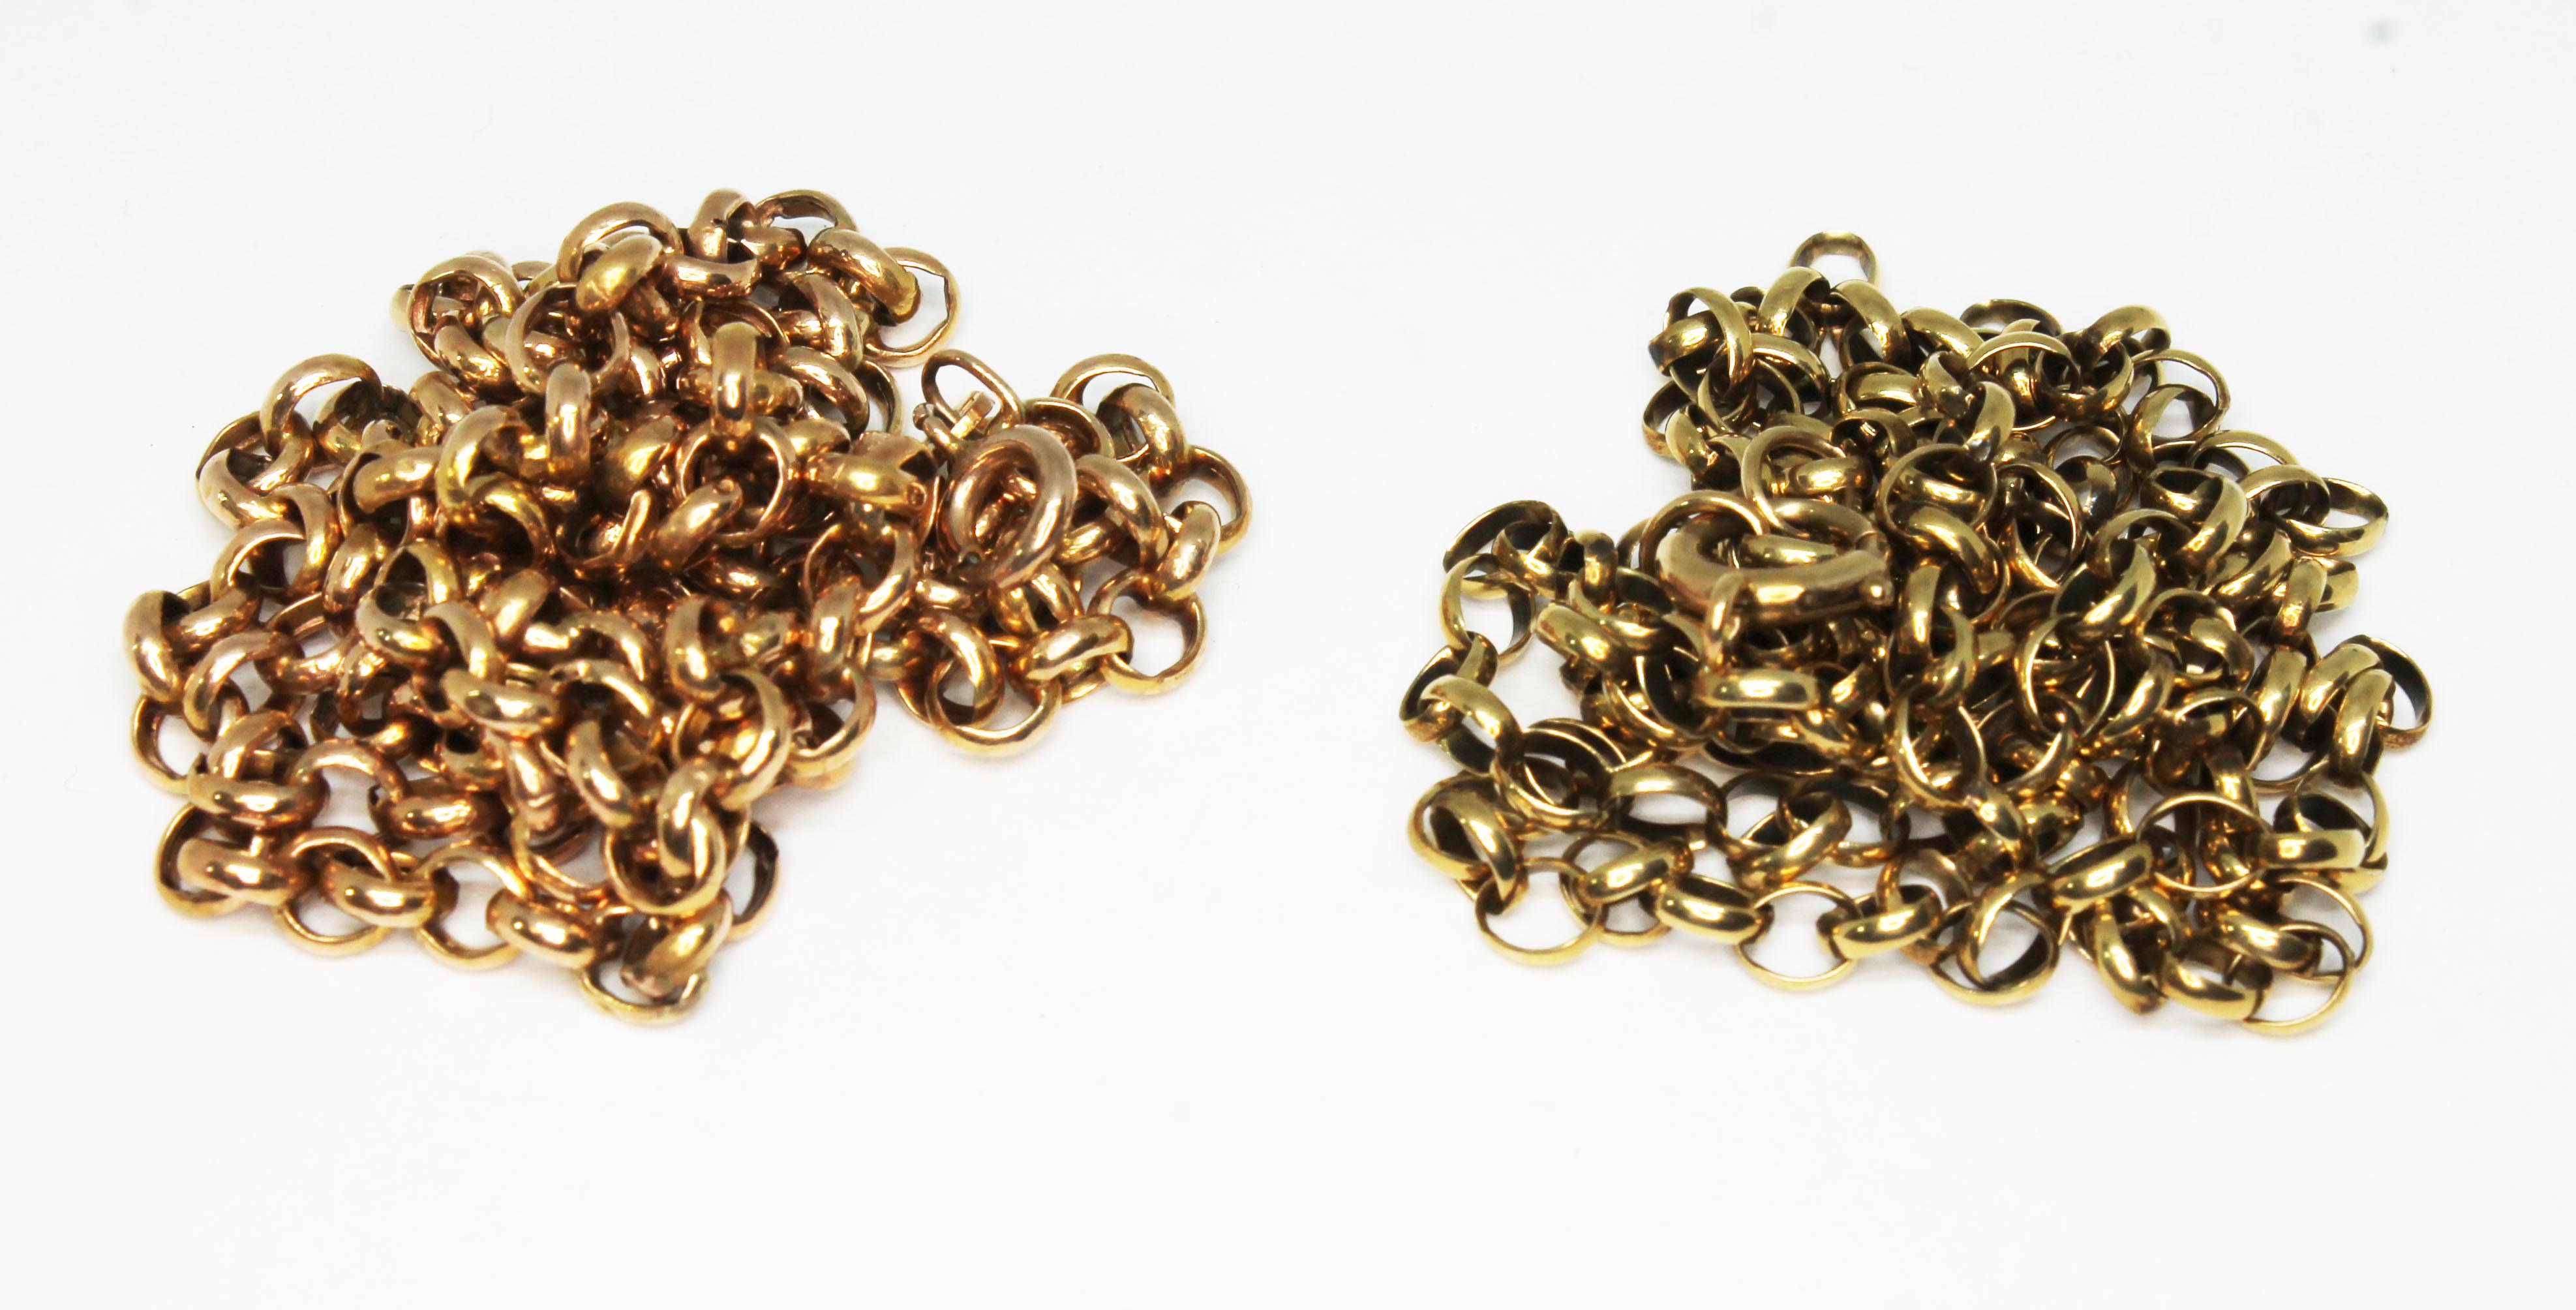 Two chains, one with 9ct hallmarks the other with 9ct gold import marks, wt. 14.9g.